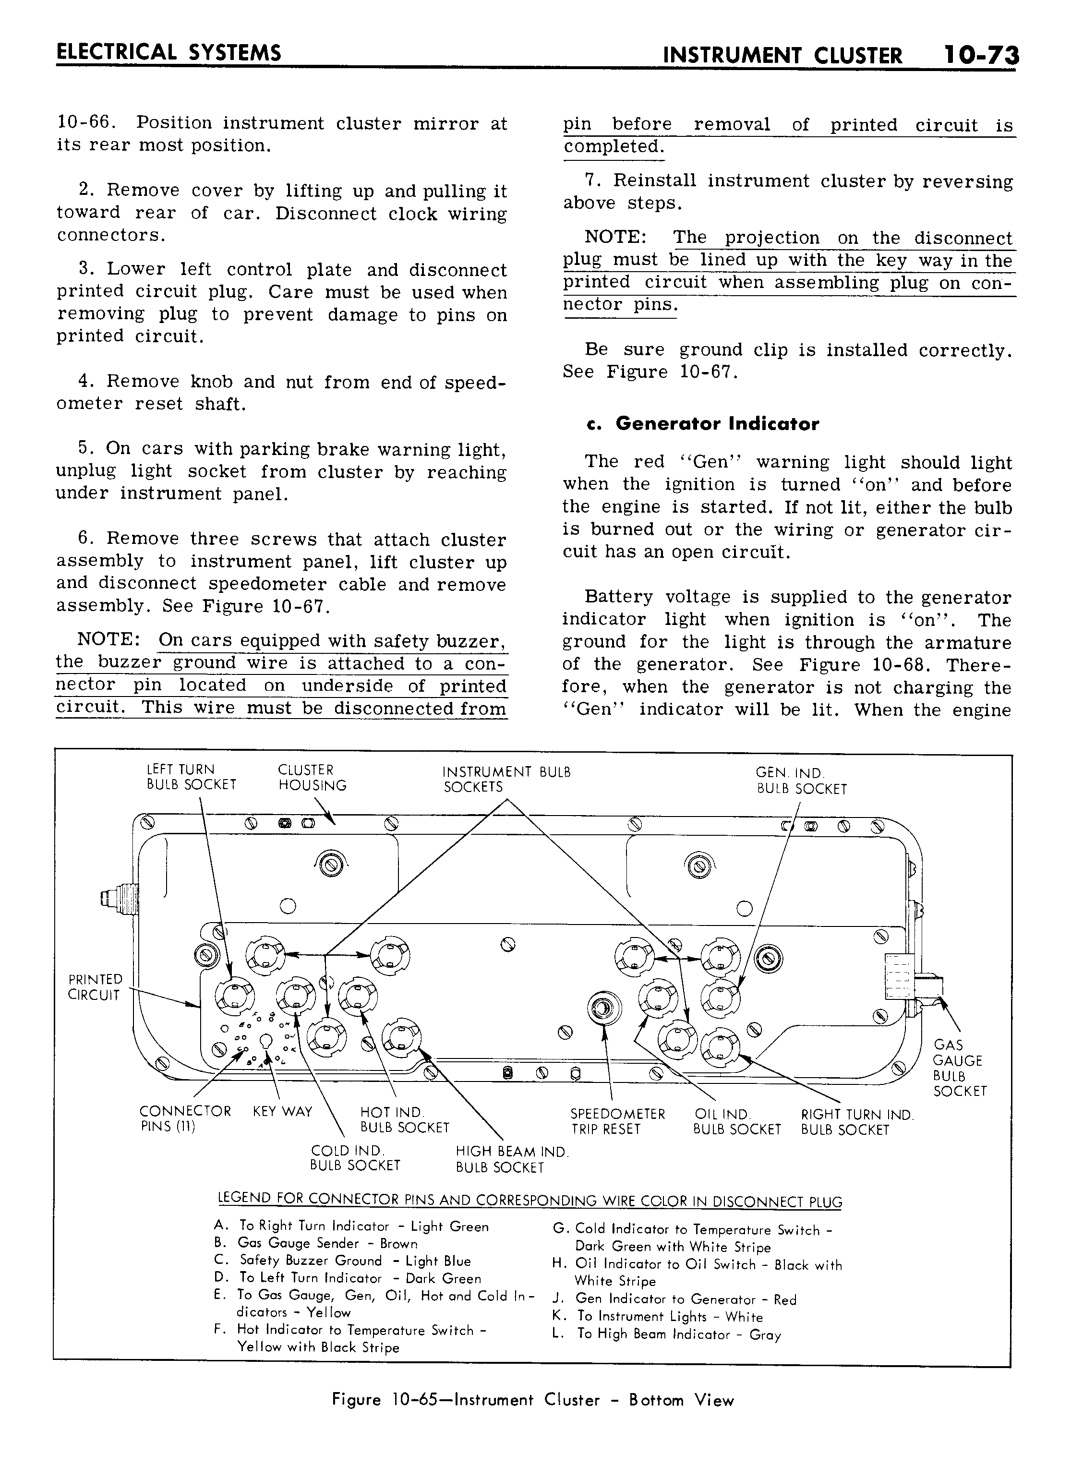 n_10 1961 Buick Shop Manual - Electrical Systems-073-073.jpg